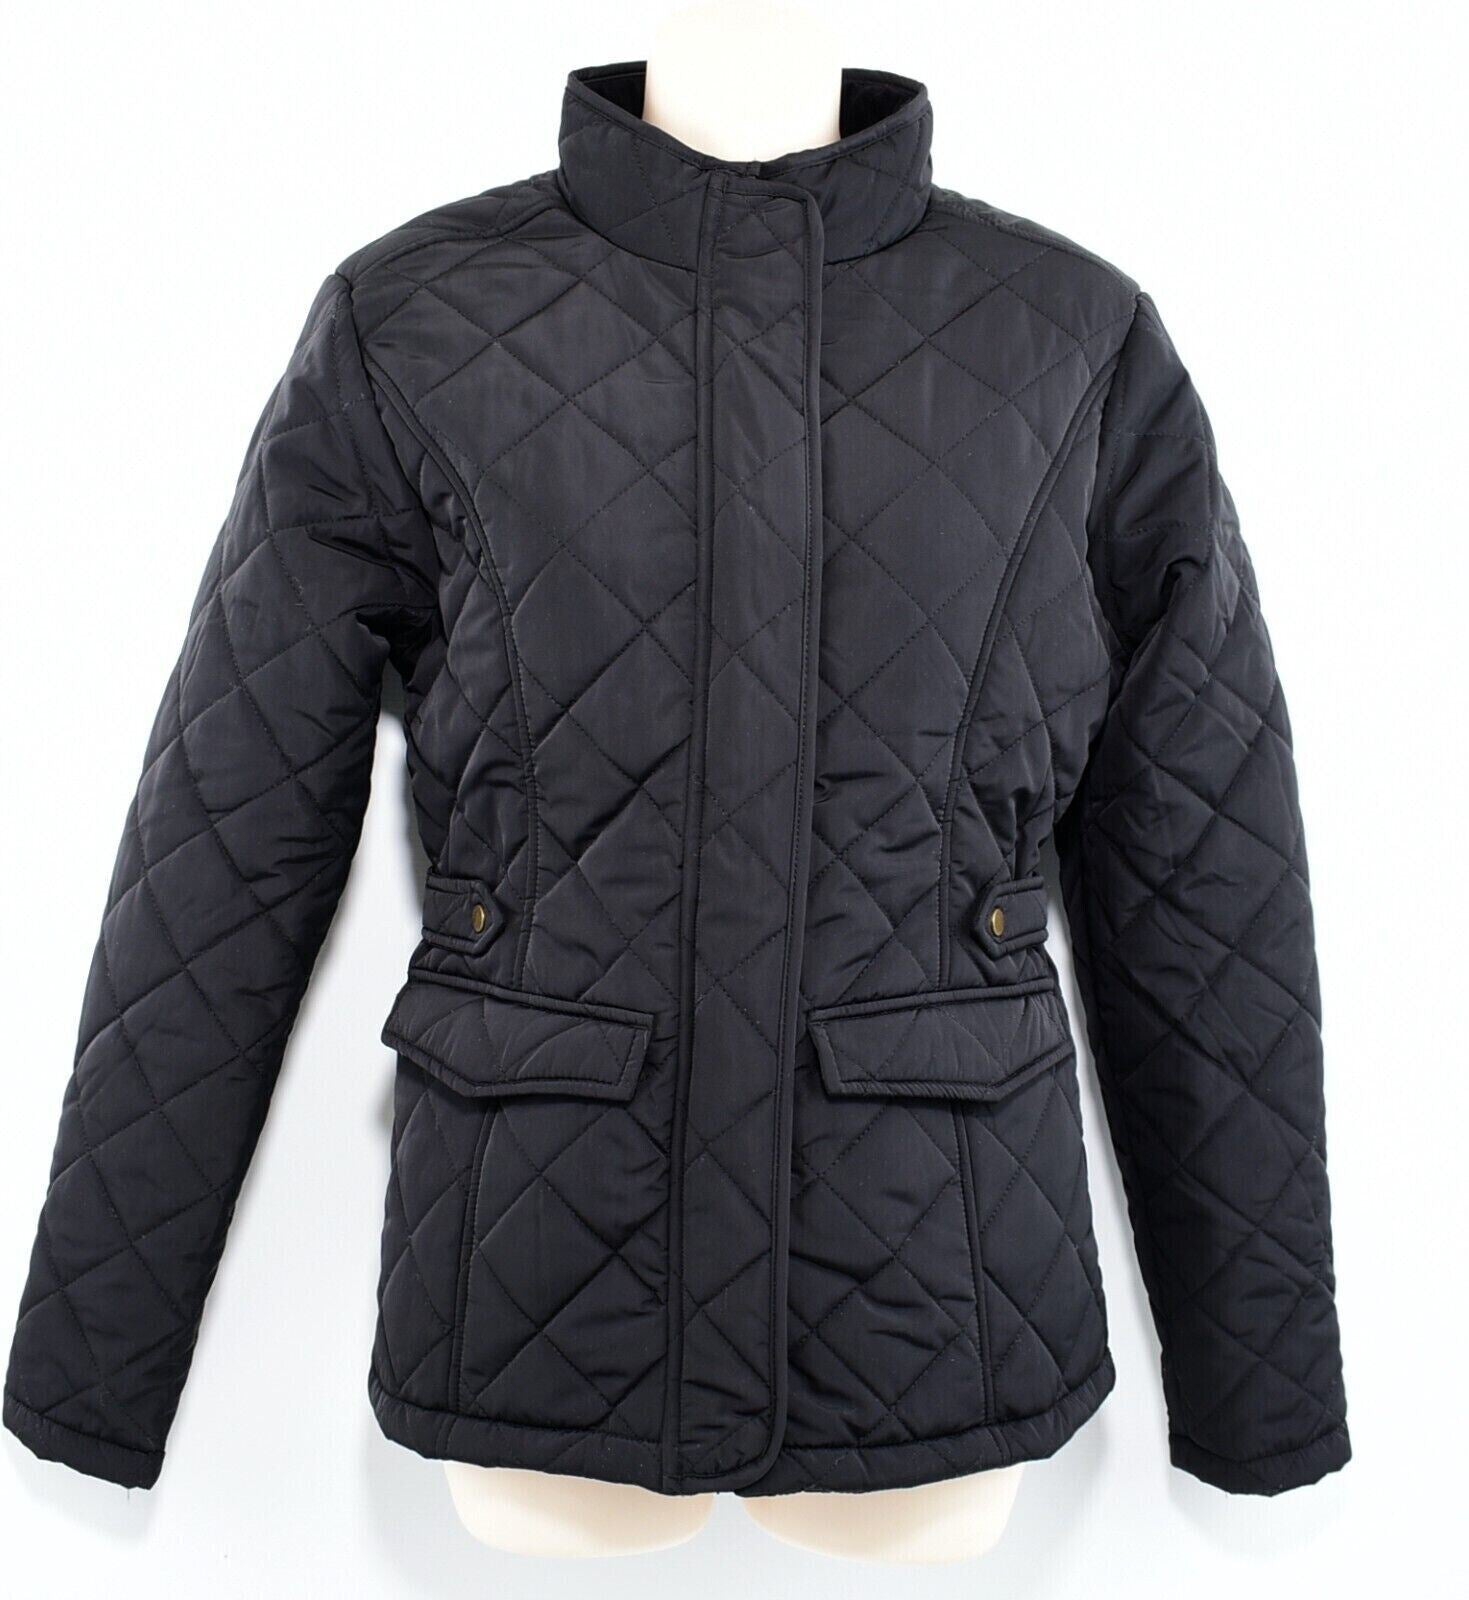 FIRETRAP Women's EMPIRE Quilted Jacket, Black, size M / UK 12